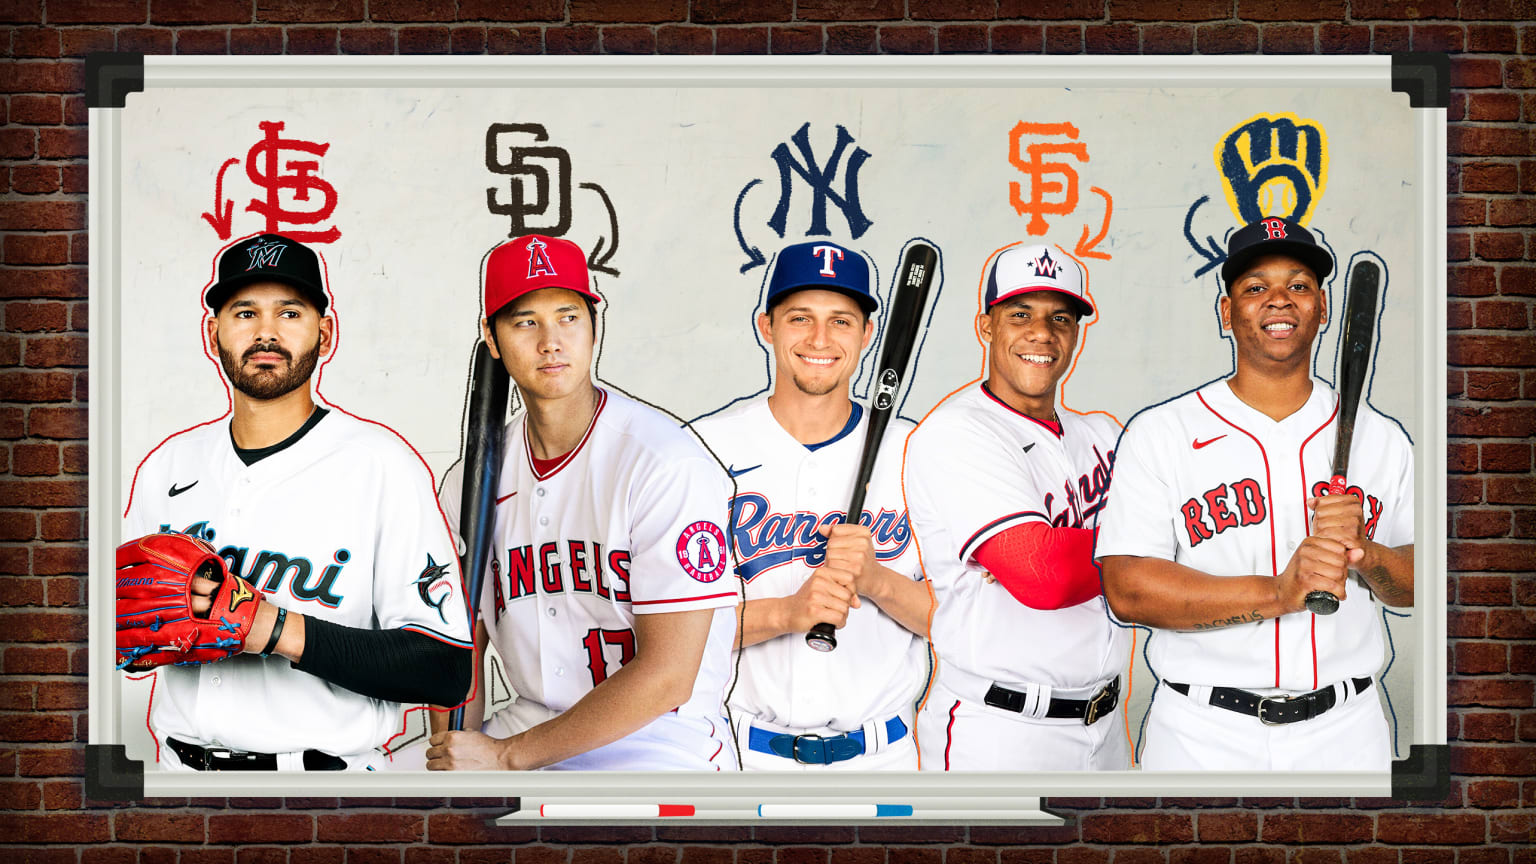 Five players in baseball uniforms in portrait poses, with different team logos above their heads and arrows pointing to each player